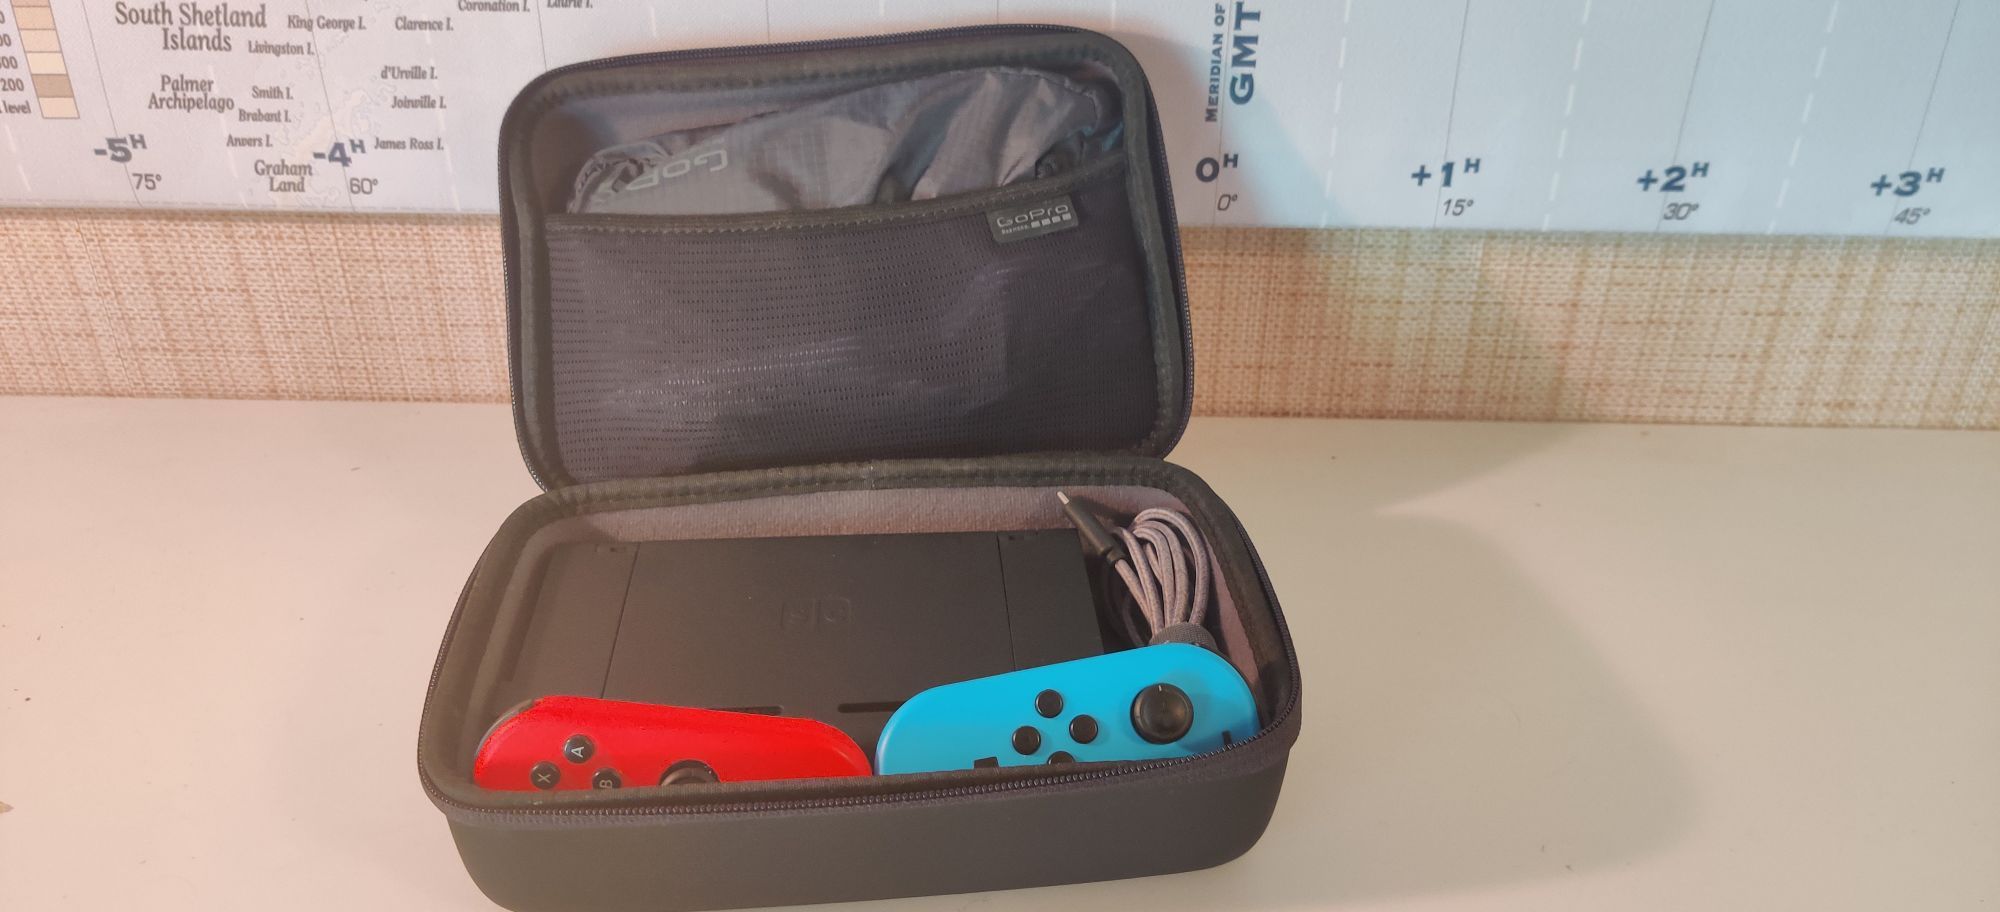 A GoPro case with Nintendo Switch packed into it